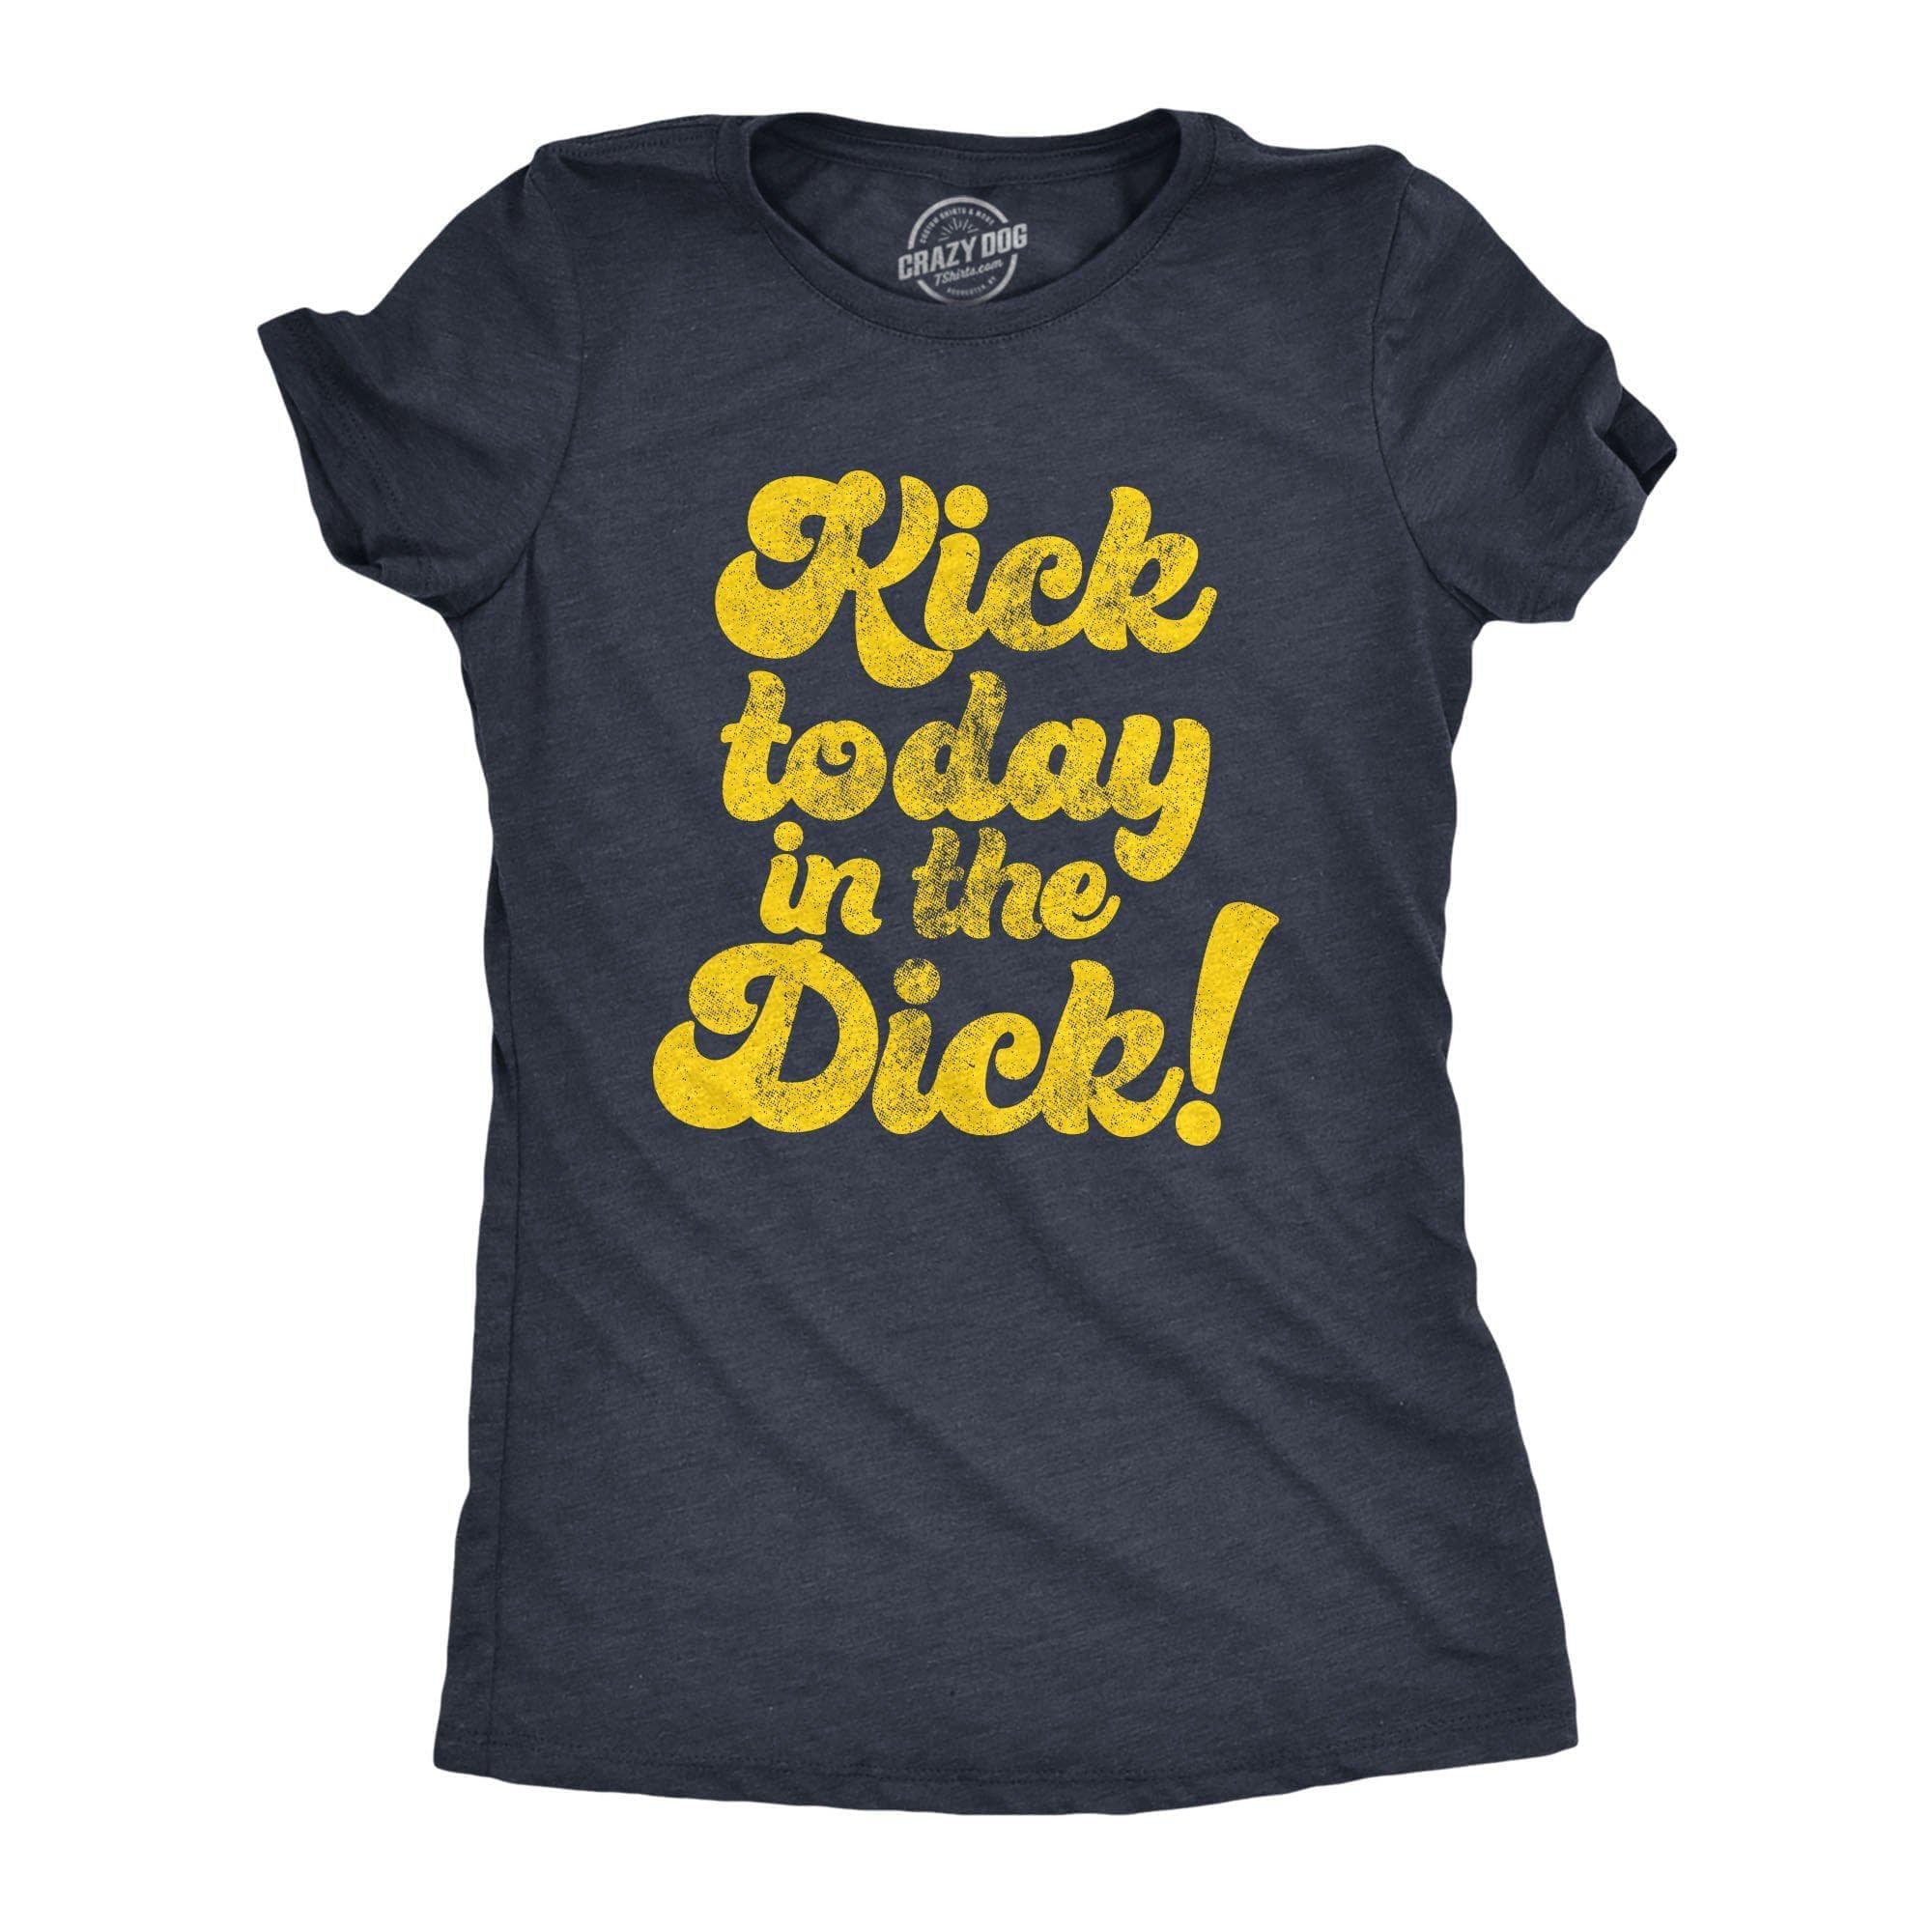 Kick Today In The Dick Women's Tshirt - Crazy Dog T-Shirts